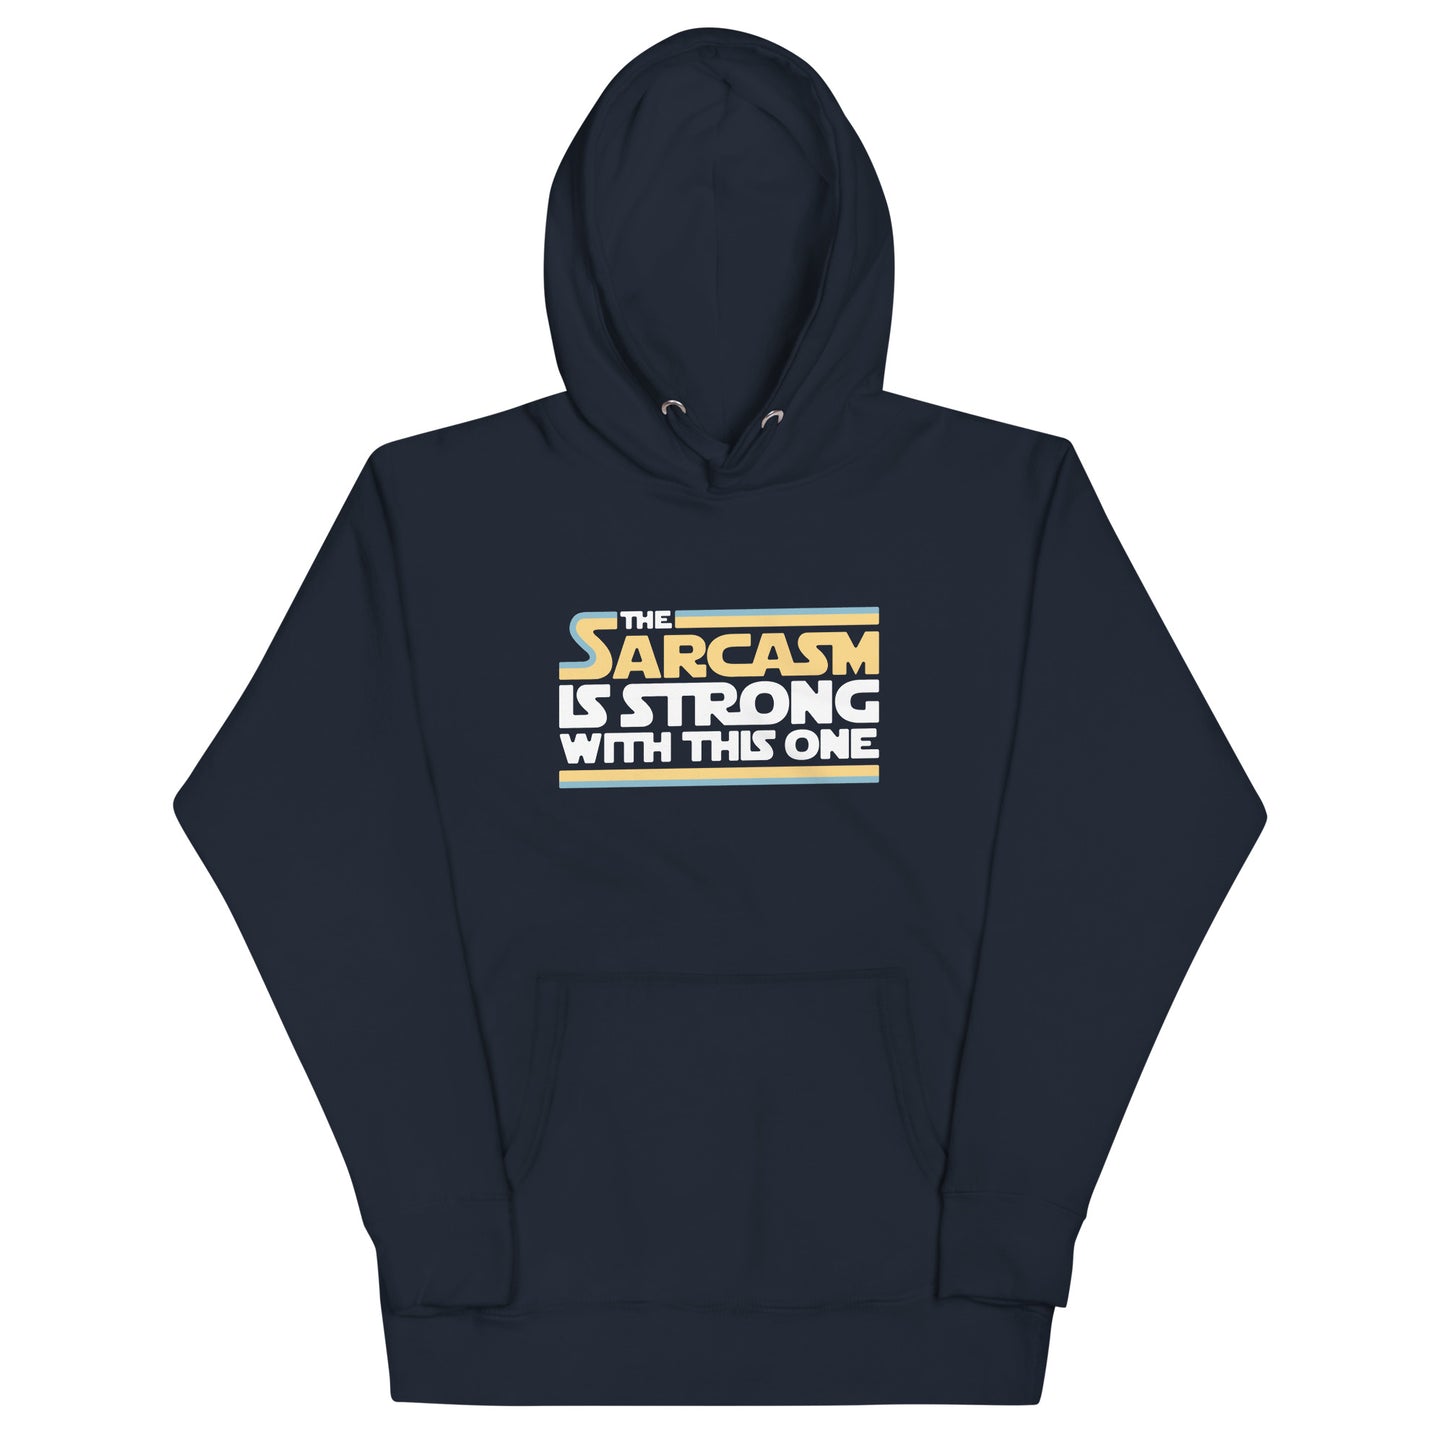 The Sarcasm Is Strong With This One Unisex Hoodie